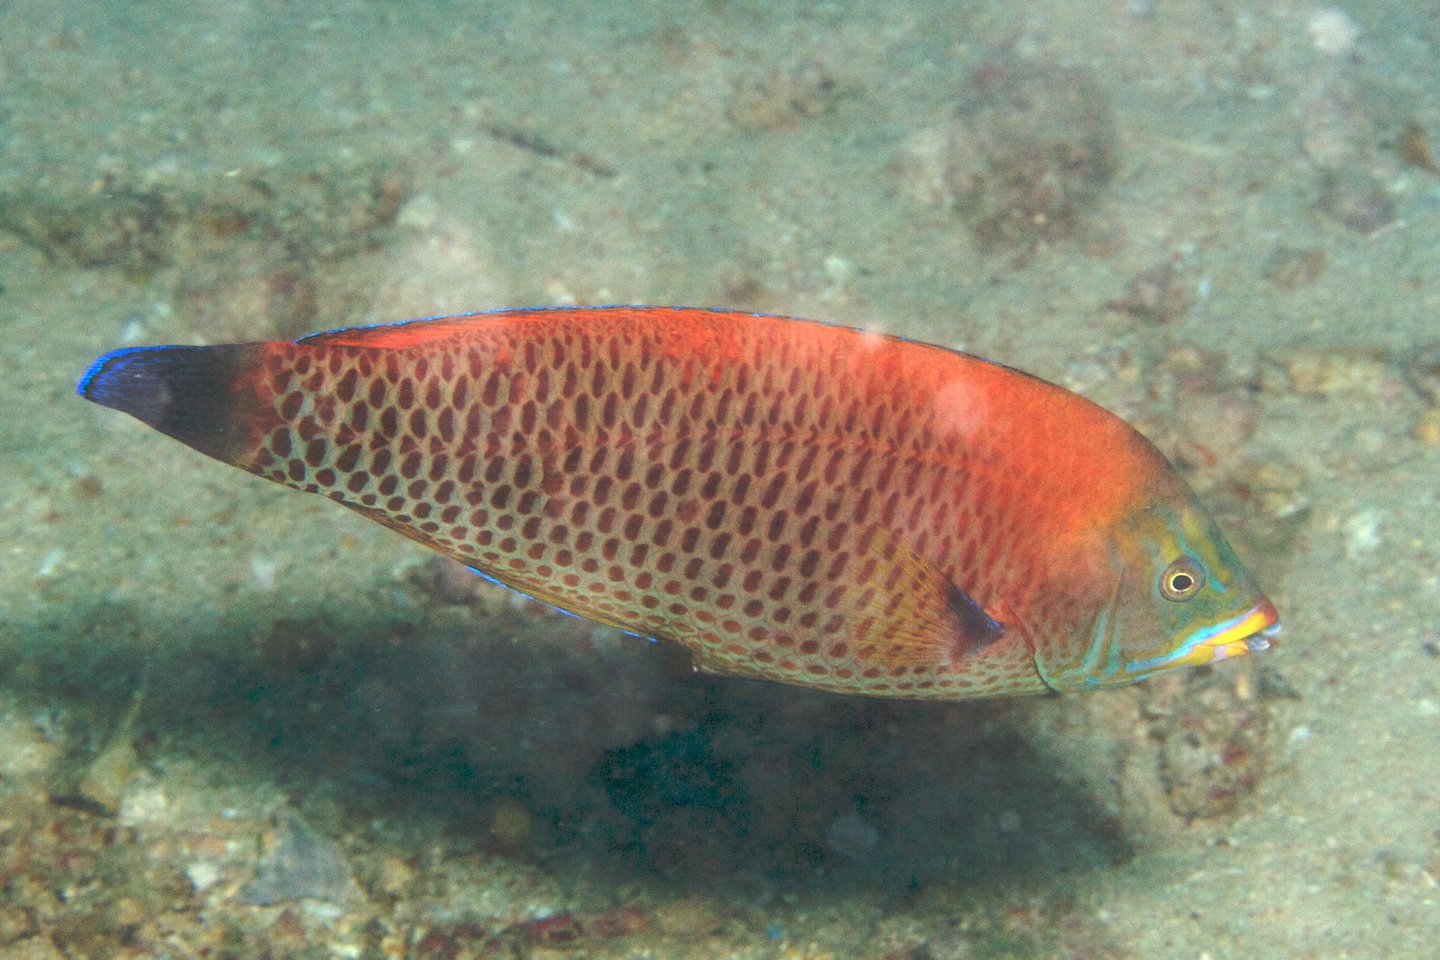 Chiseltooth wrasse